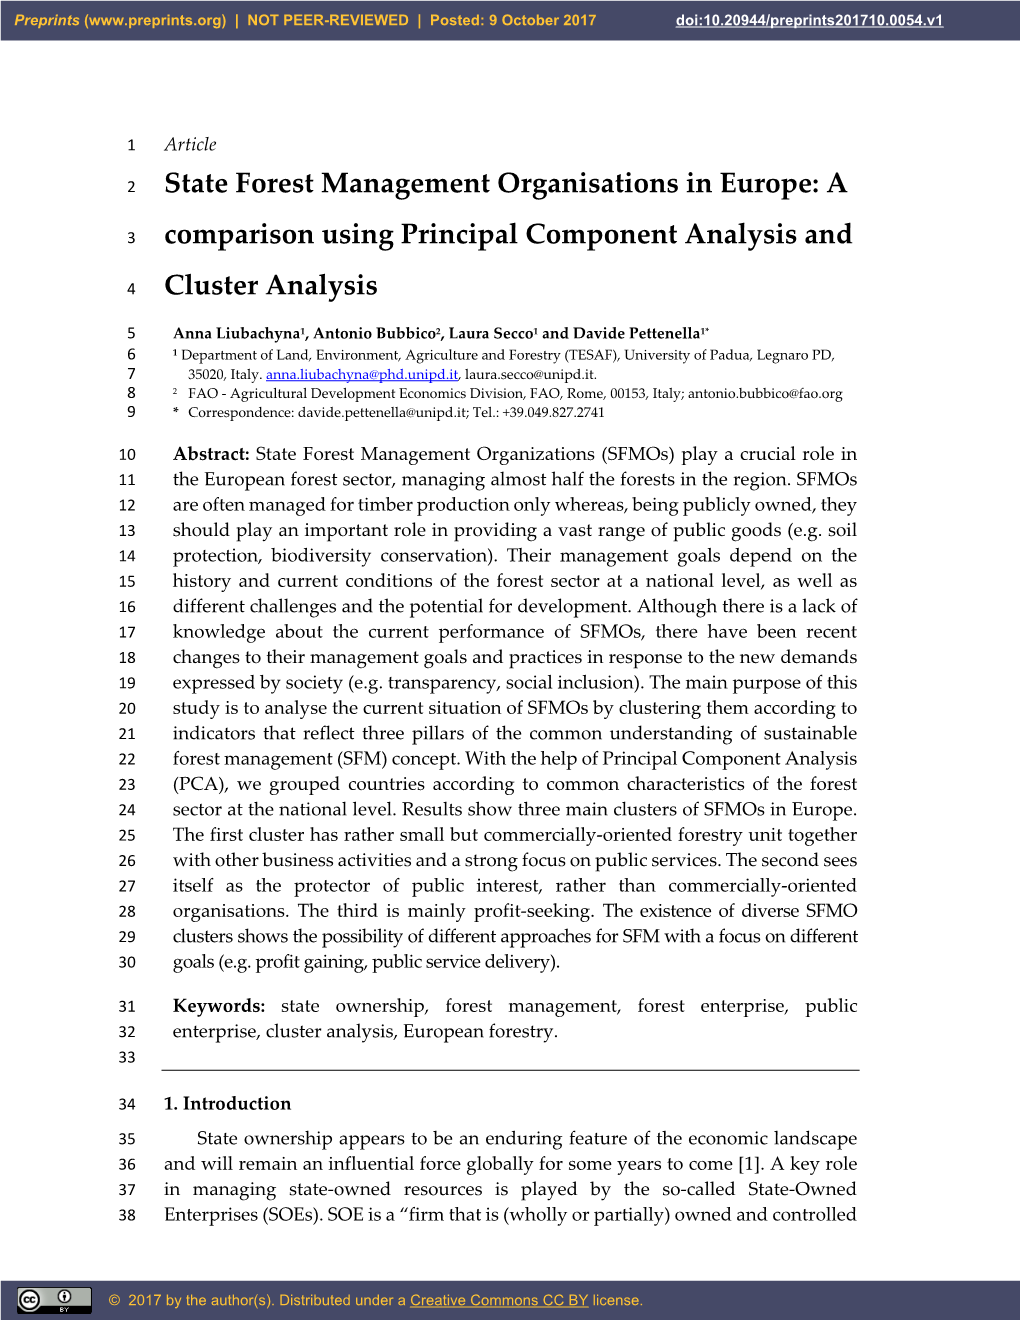 State Forest Management Organisations in Europe: A